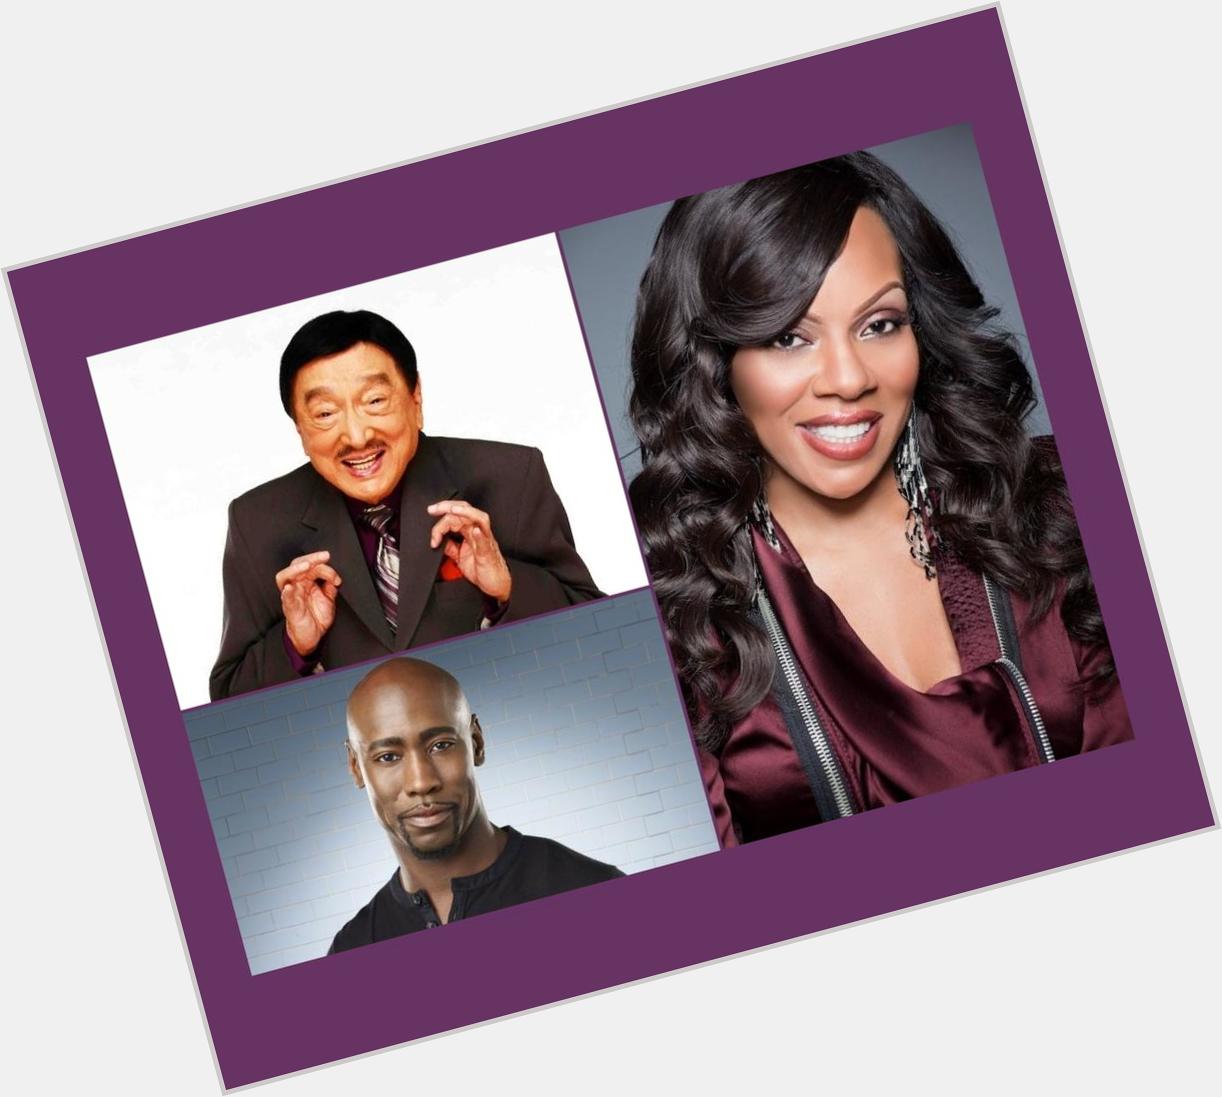  wishes Wendy Raquel Robinson, DB Woodside, & the late Dolphy (1928 - 2012), a very happy birthday. 